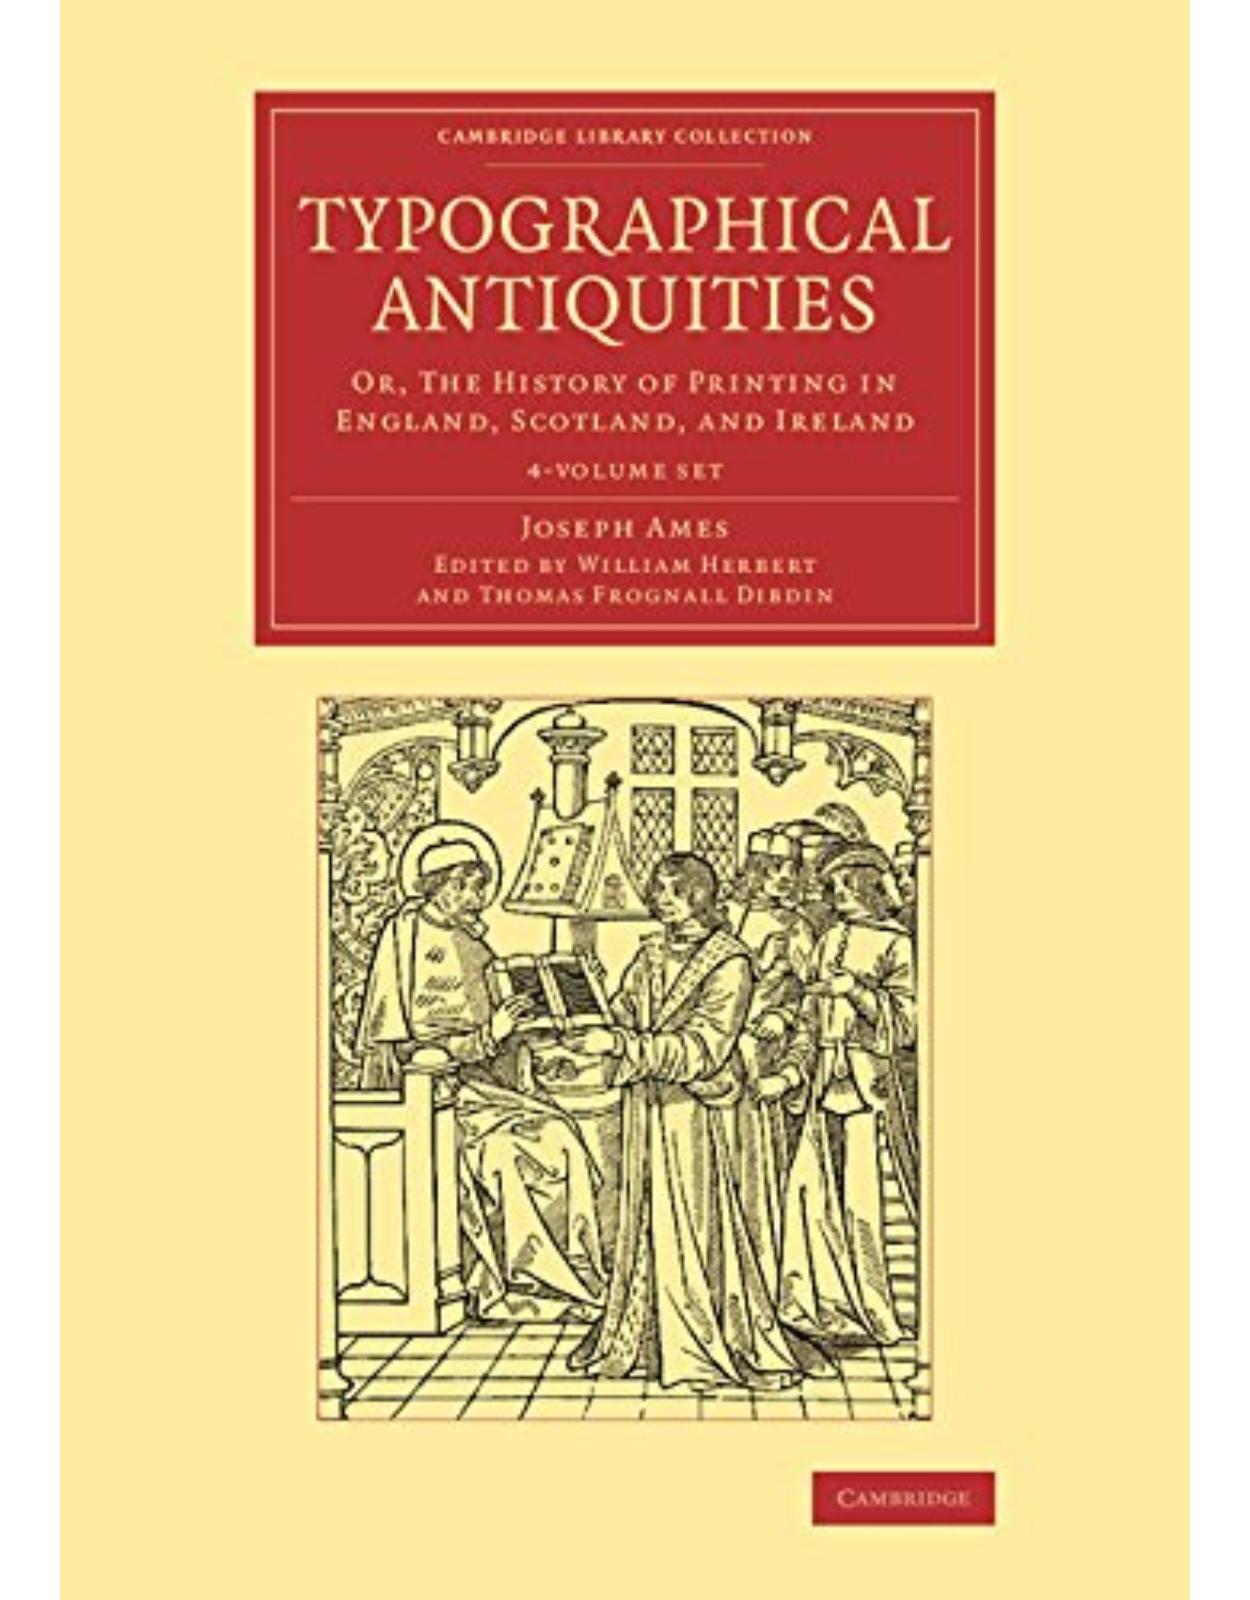 Typographical Antiquities 4 Volume Set: Or, The History of Printing in England, Scotland, and Ireland (Cambridge Library Collection - History of Printing, Publishing and Libraries) 